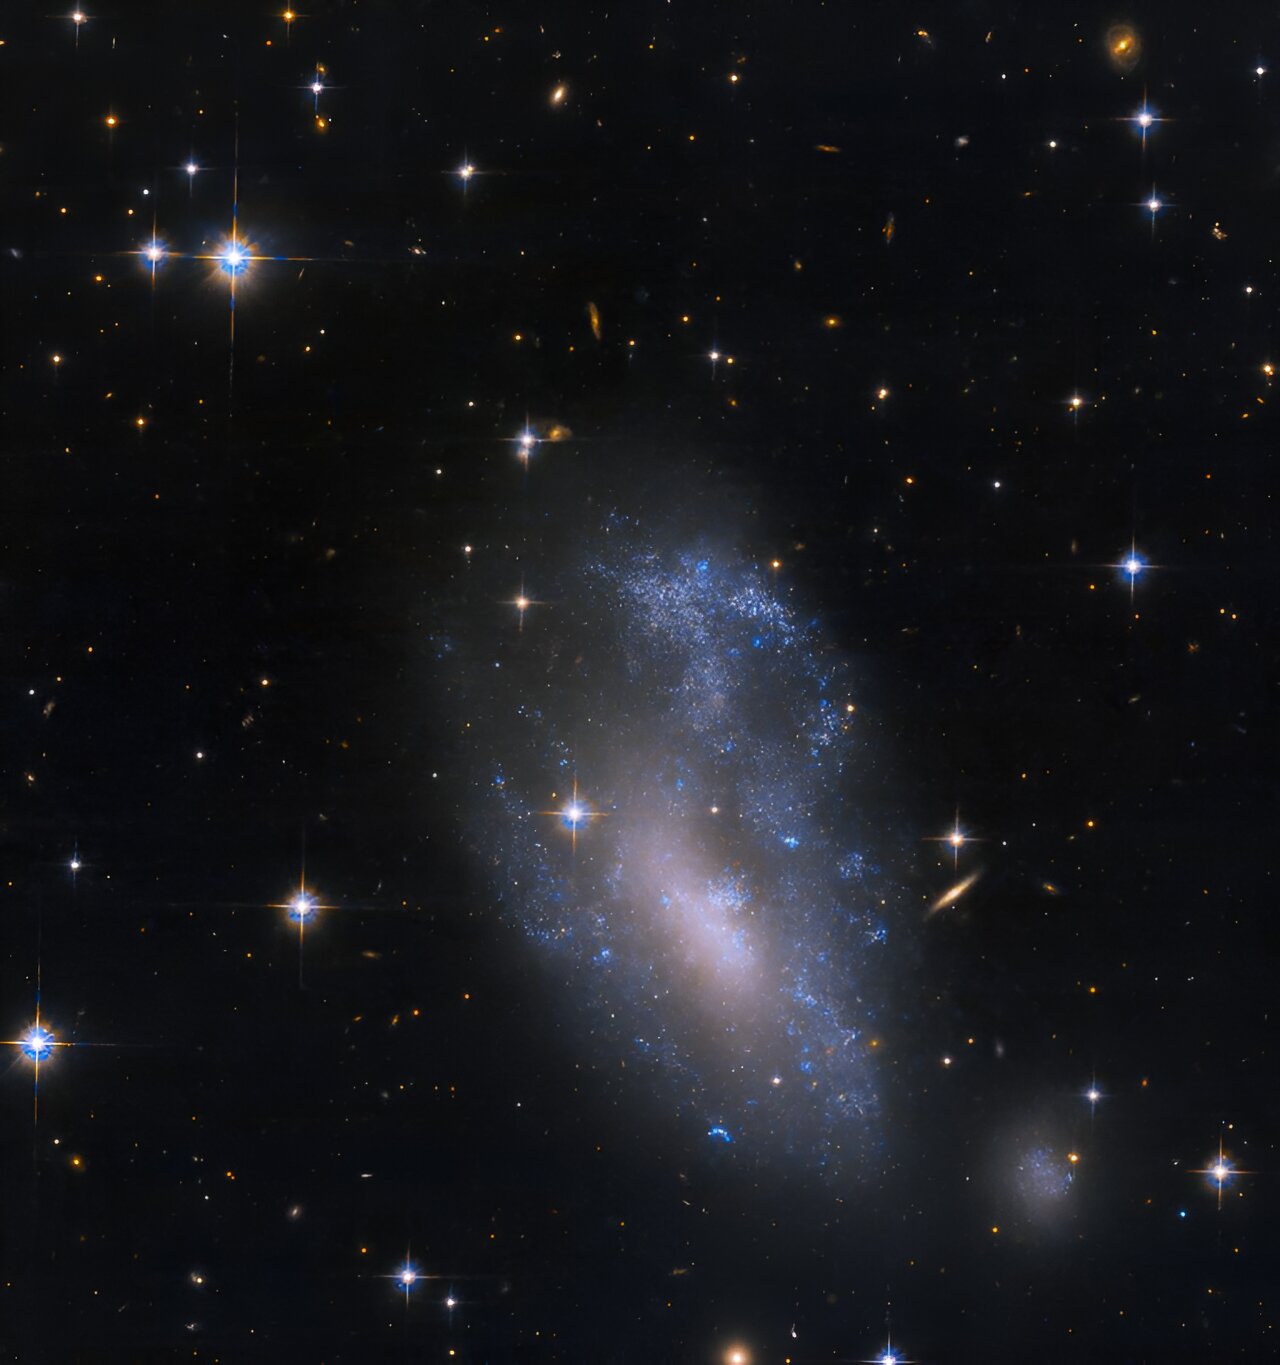 Hubble Observes an Alleged Galaxy Encounter